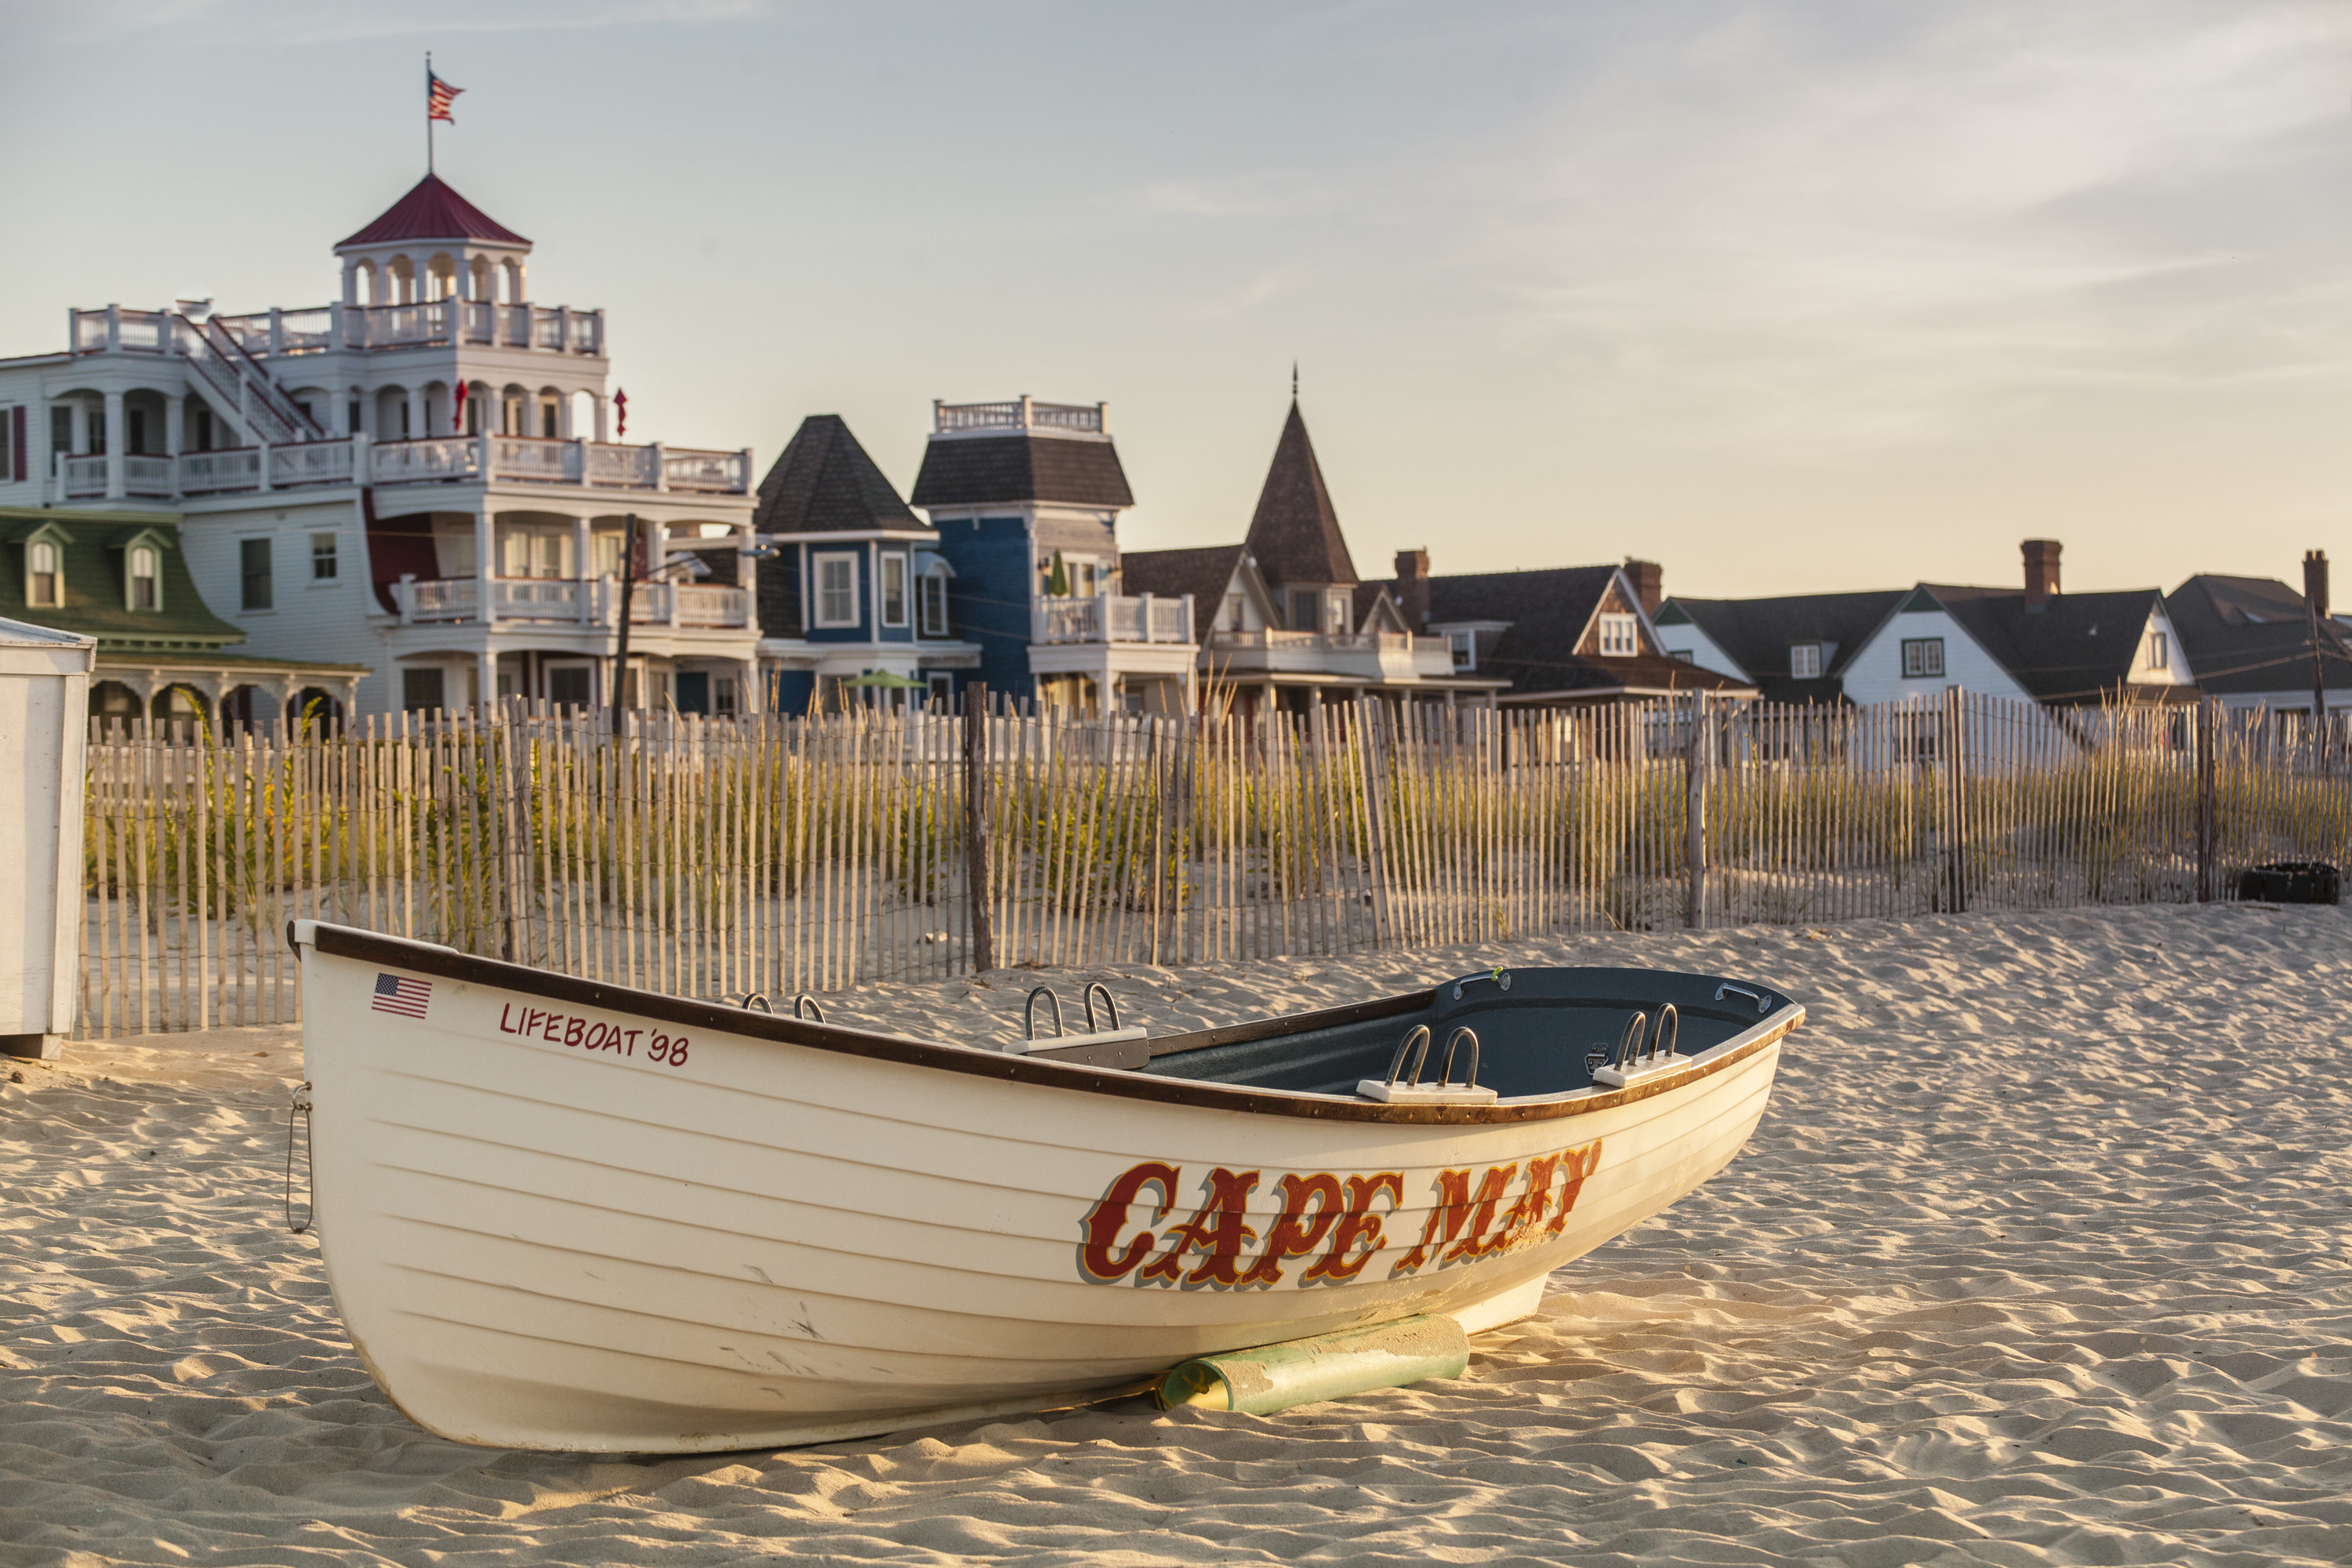 A view of a boat on the beach in Cape May in front of a street of Victorian-style homes